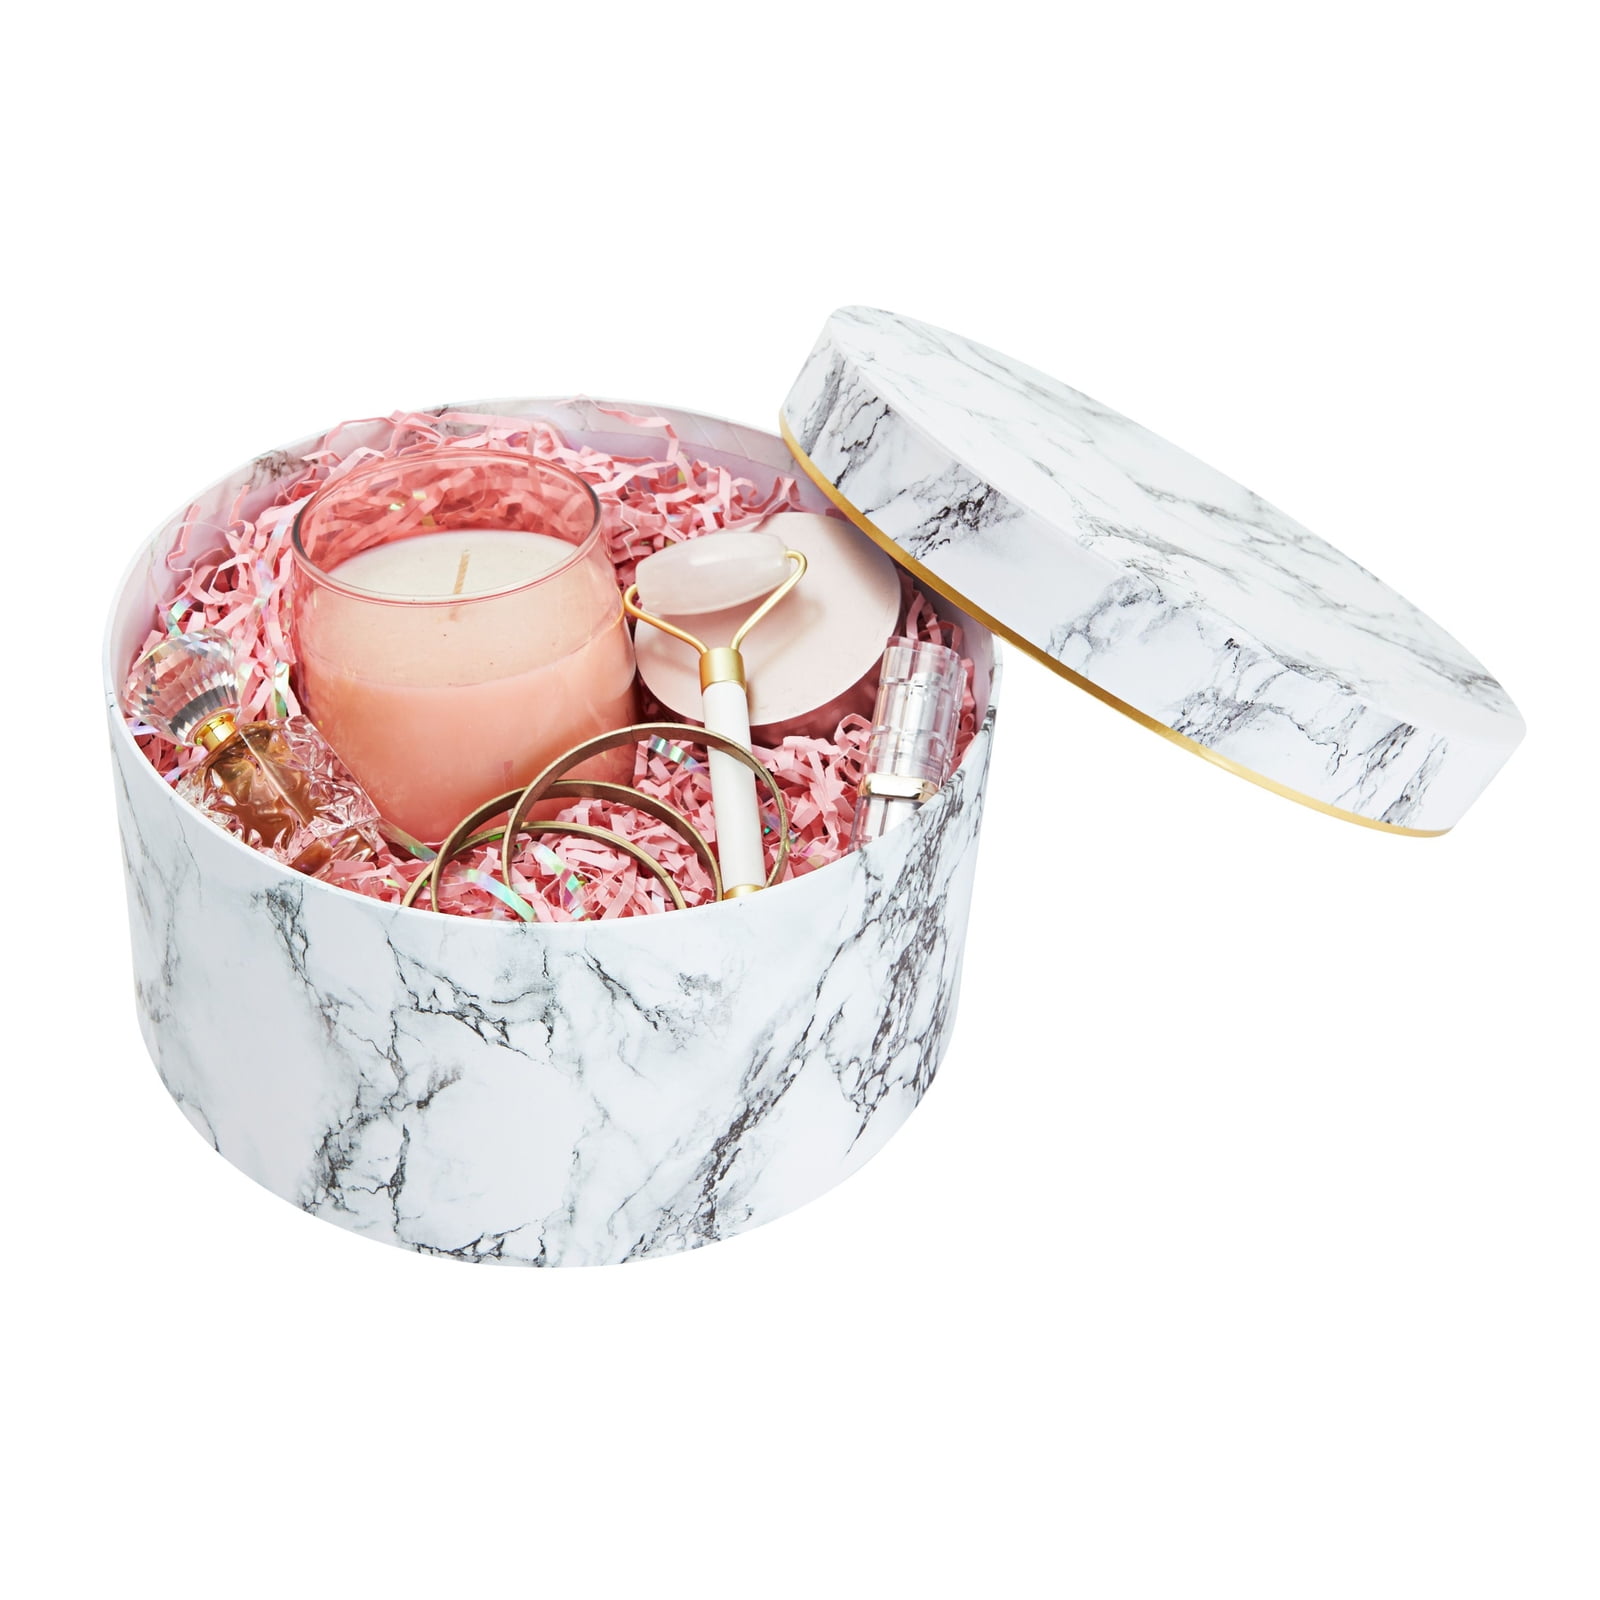 The Essentials Marble Box - 3 Sizes